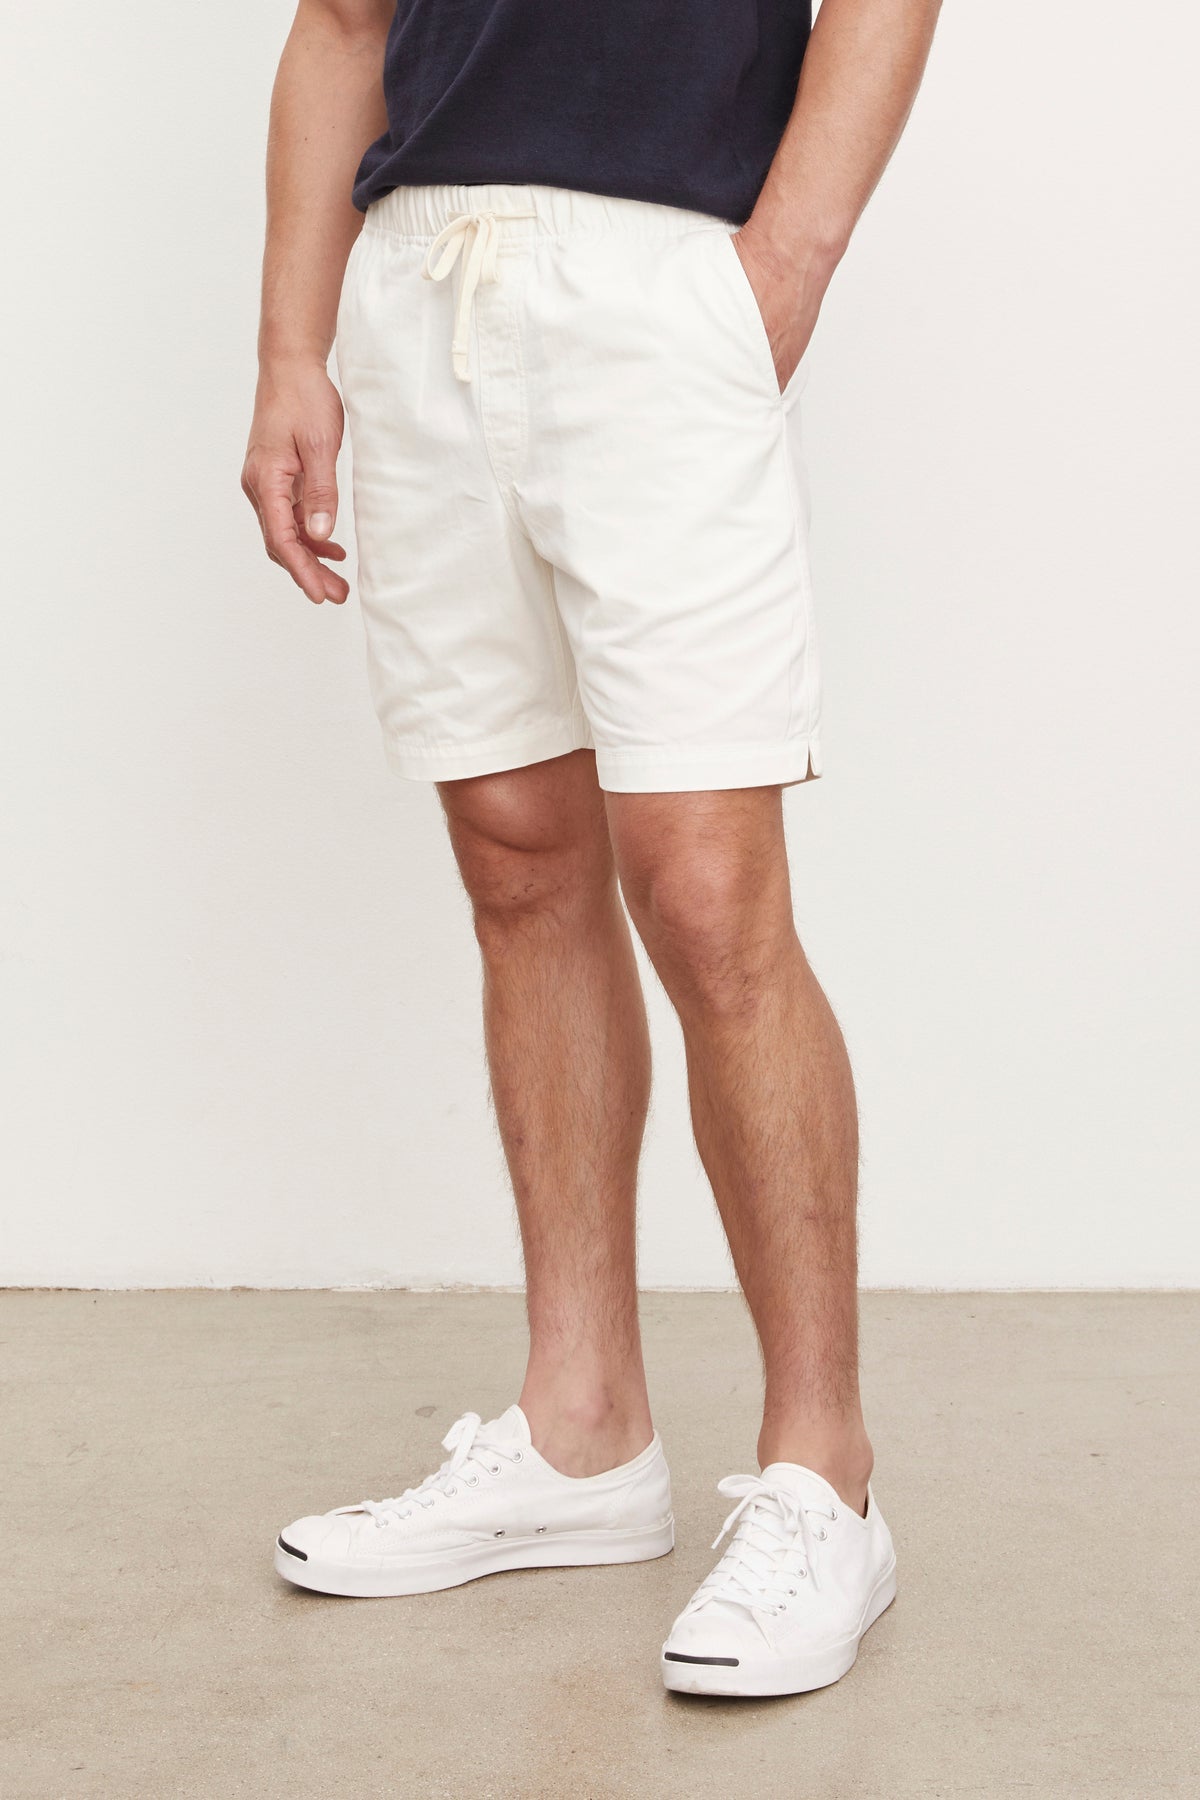 Man wearing a navy blue t-shirt and FIELDER shorts by Velvet by Graham & Spencer with white sneakers, standing in a room with a plain background. Only his torso and legs are visible.-36753575870657